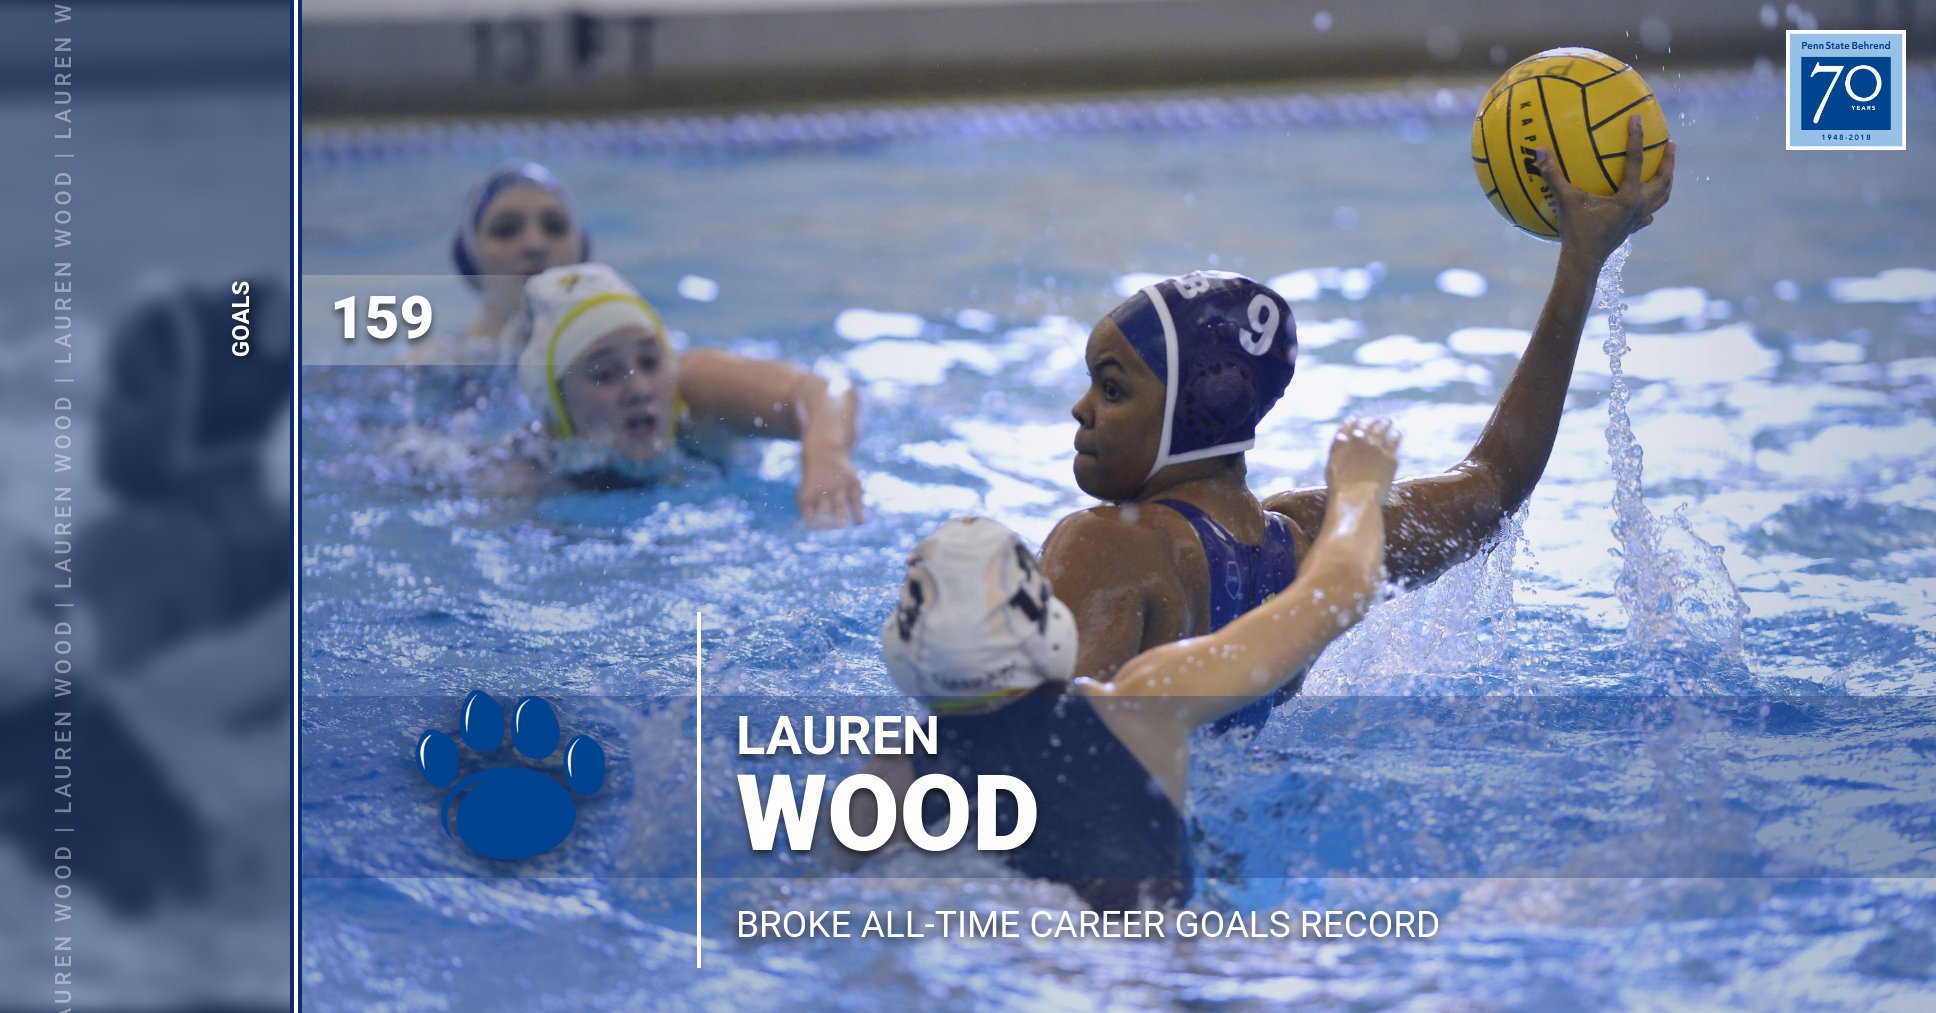 Wood Breaks Behrend Career Goals Record; Lions Fall to W&J and Grove City